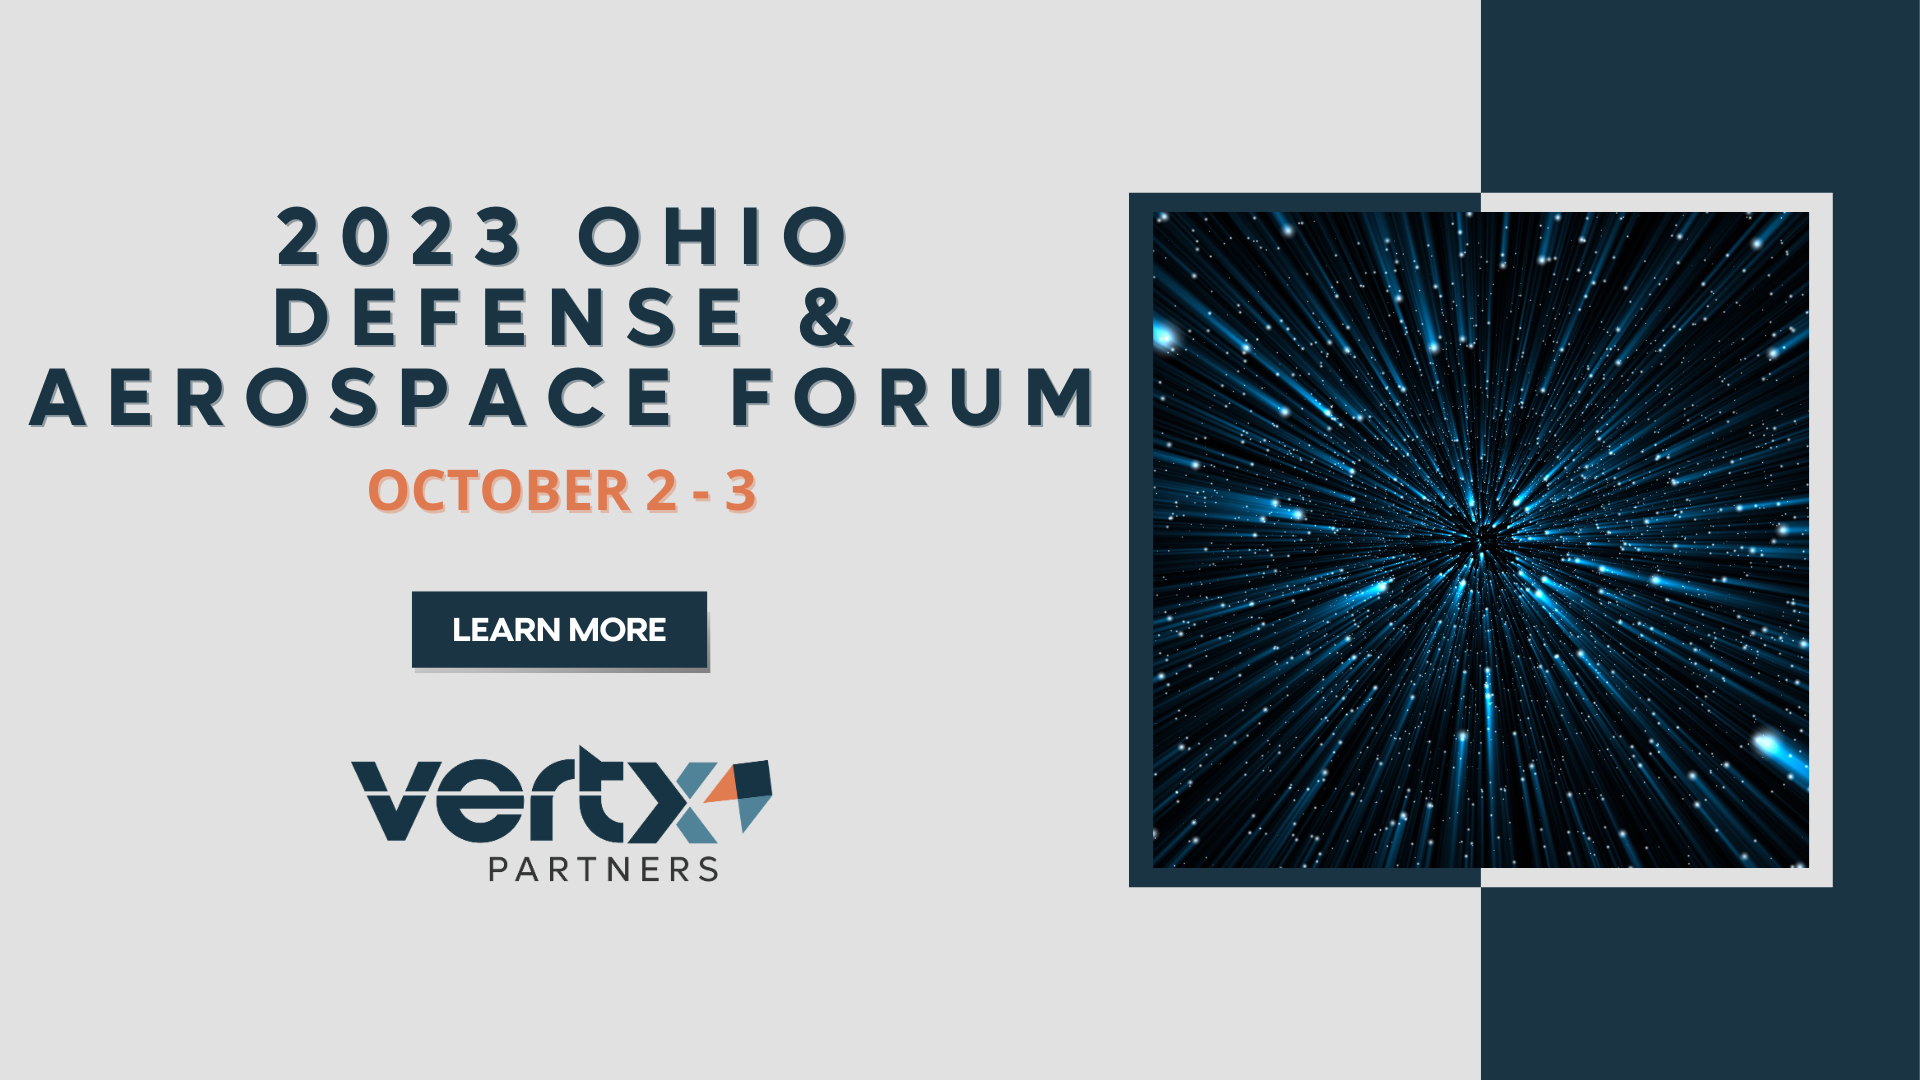 This graphic has the title 2023 Ohio Defense & Aerospace Forum with the dates october 2 - 3 under it and a photo of stars in space next to it.